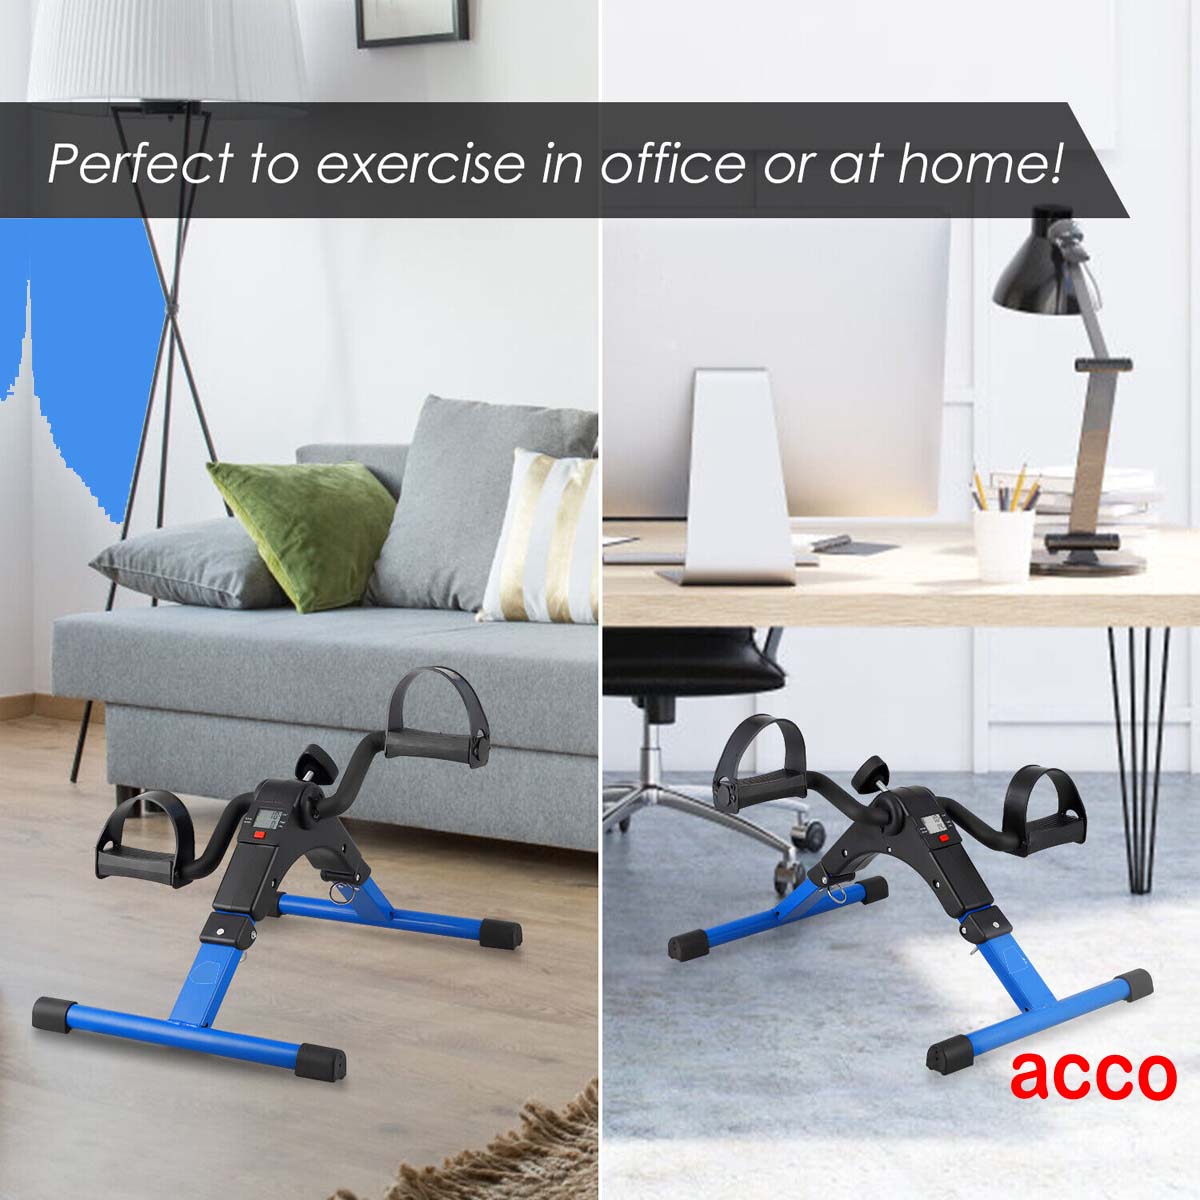 acco Mini Exercise Bike (with Digital Meter and Resistance)